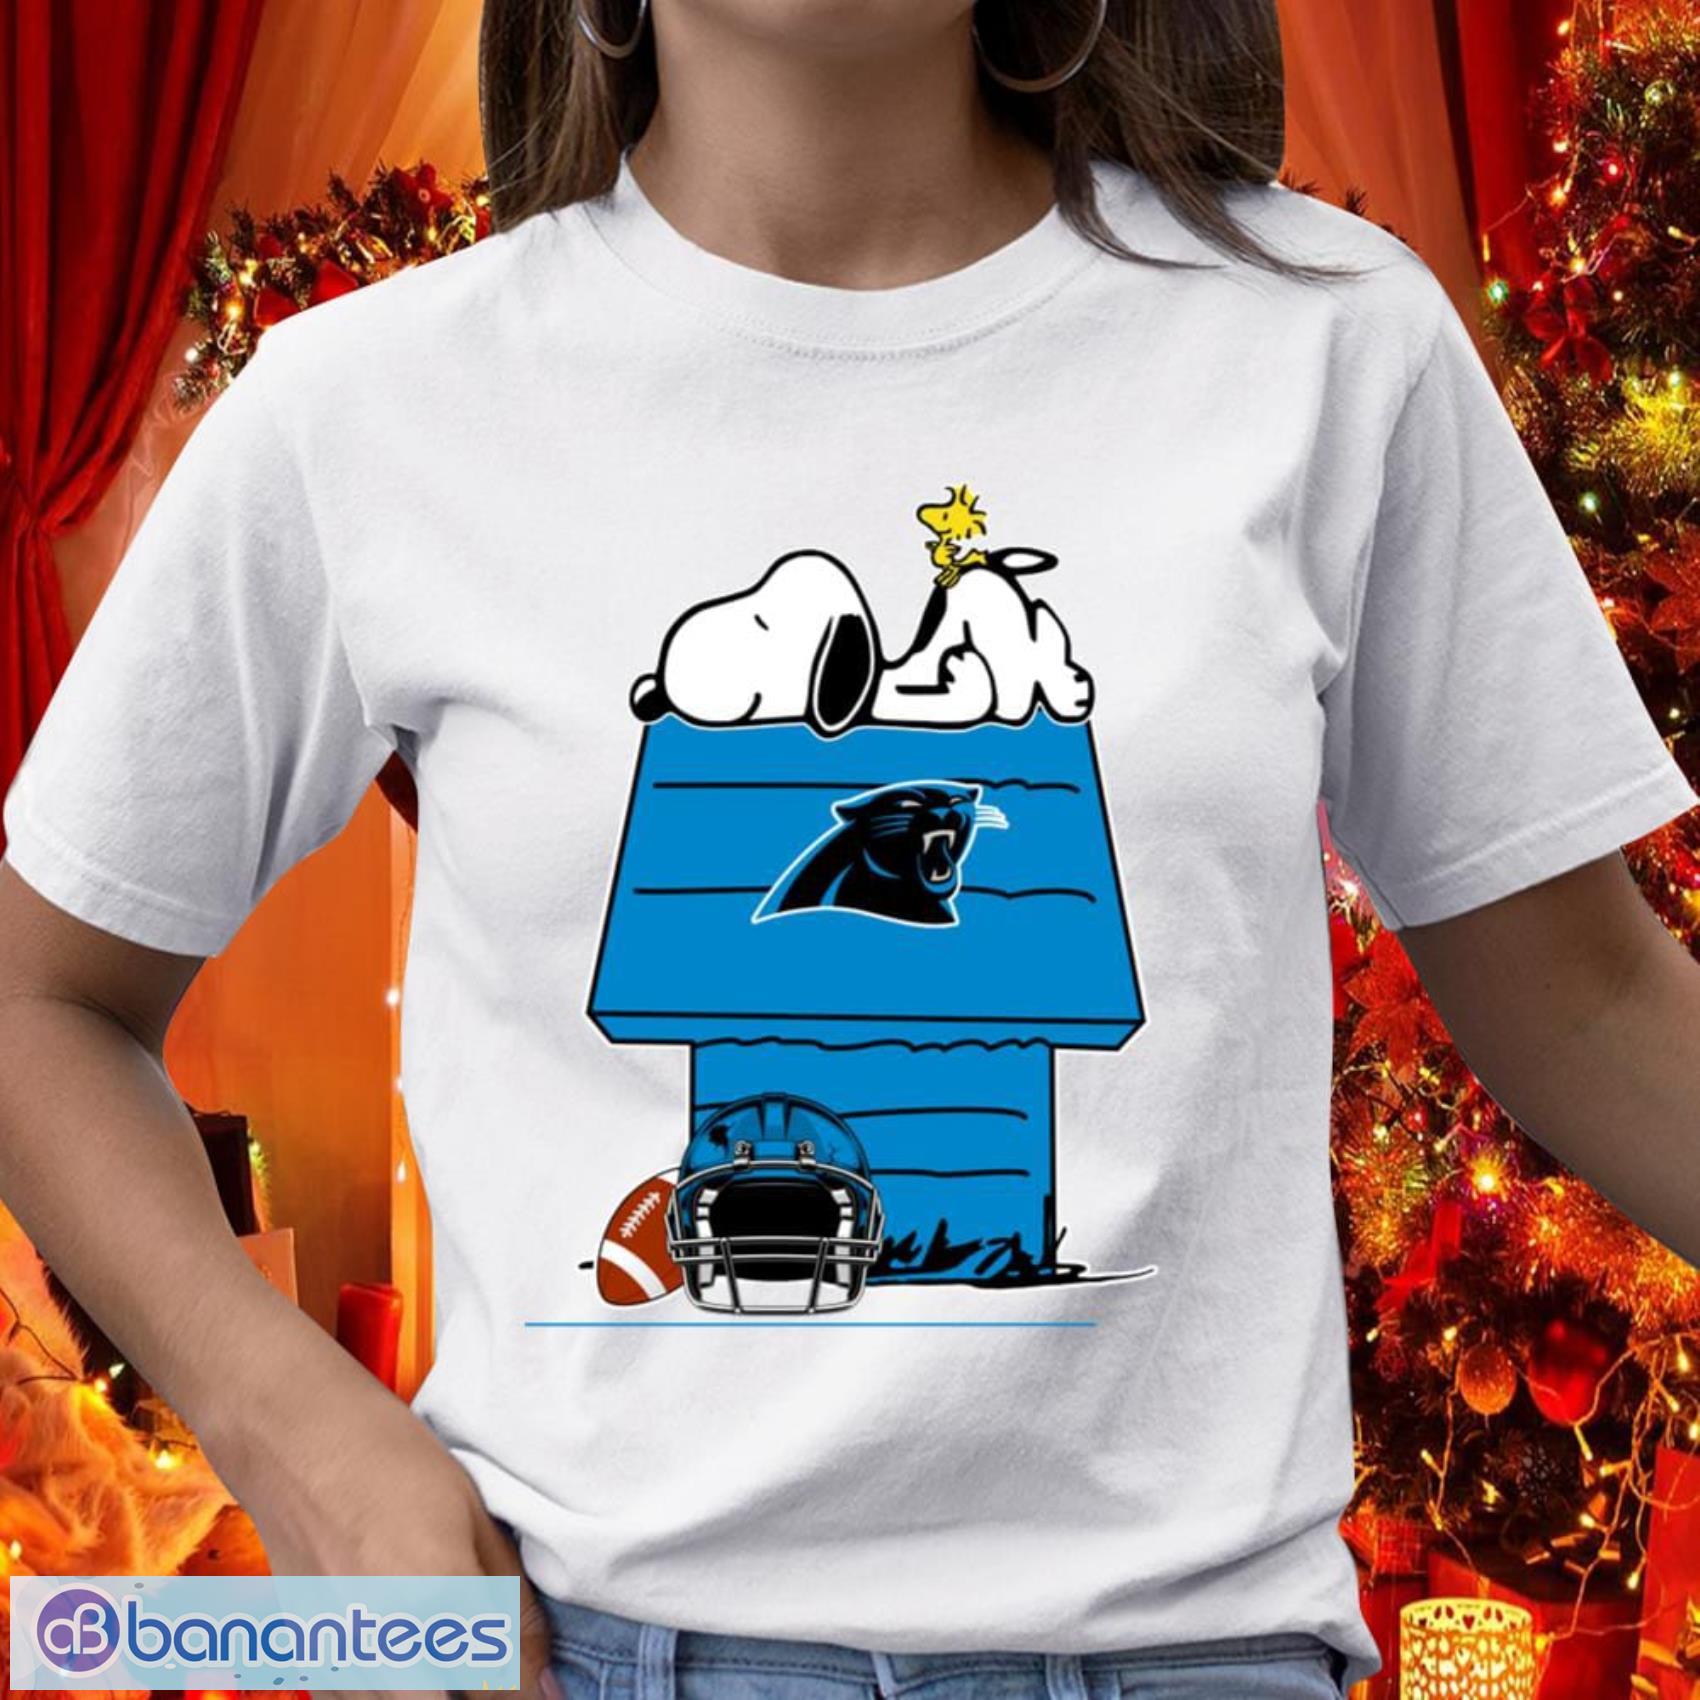 Carolina Panthers NFL Football Gift Fr Fans Snoopy Woodstock The Peanuts Movie T Shirt - Carolina Panthers NFL Football Snoopy Woodstock The Peanuts Movie T Shirt_1